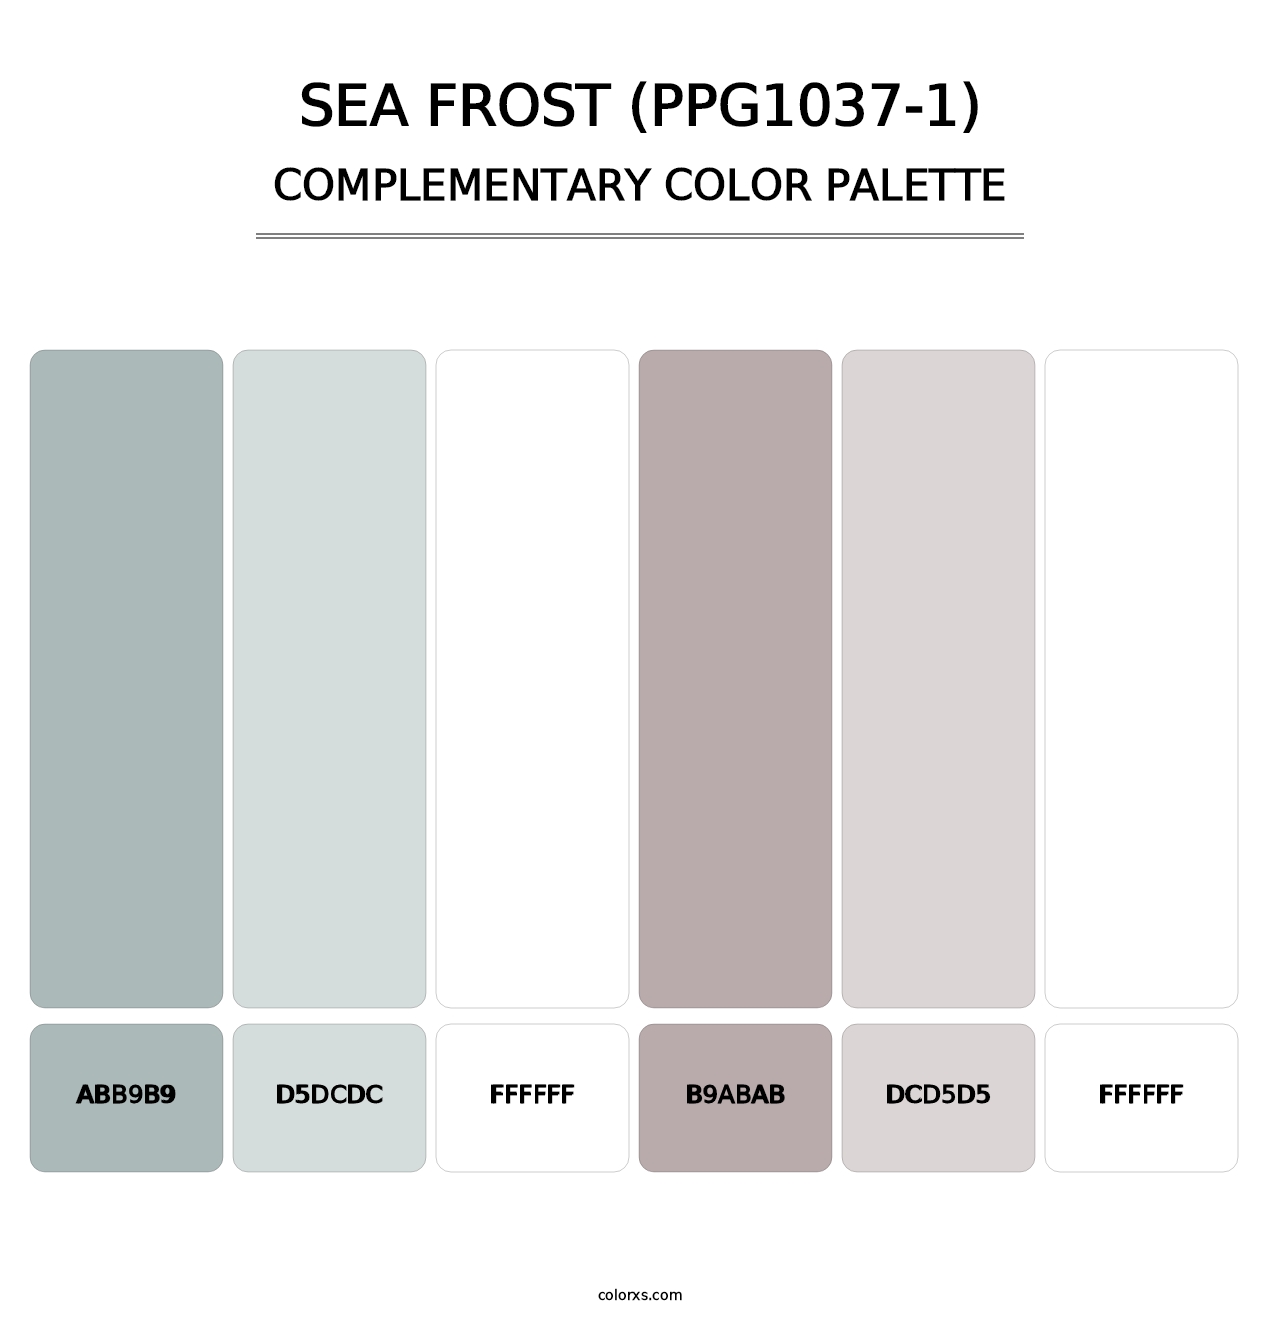 Sea Frost (PPG1037-1) - Complementary Color Palette